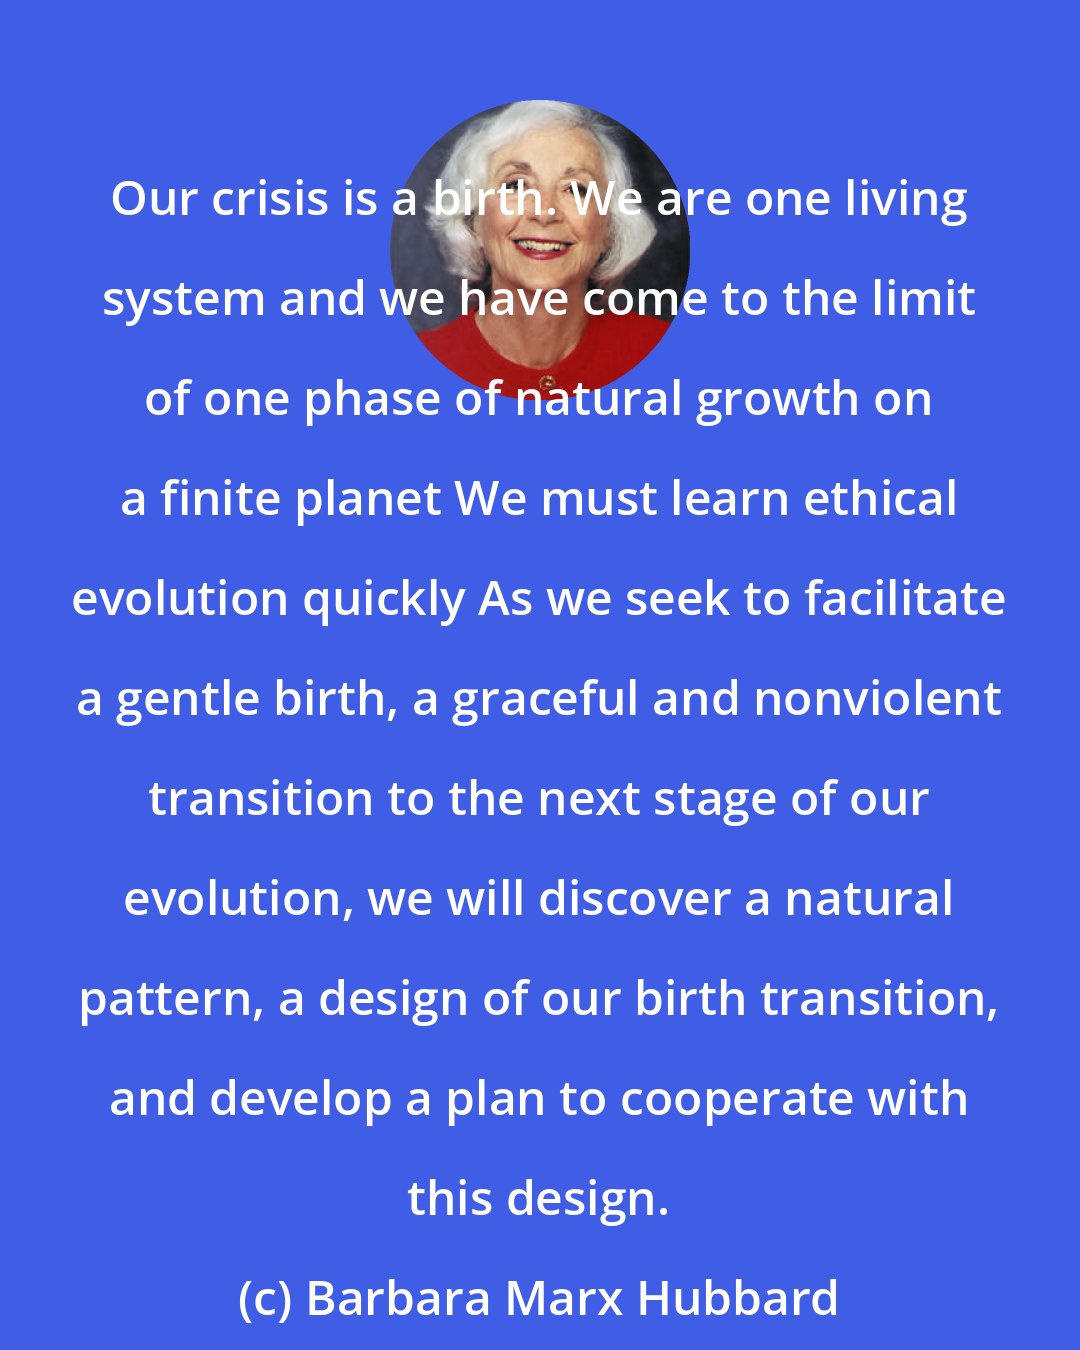 Barbara Marx Hubbard: Our crisis is a birth. We are one living system and we have come to the limit of one phase of natural growth on a finite planet We must learn ethical evolution quickly As we seek to facilitate a gentle birth, a graceful and nonviolent transition to the next stage of our evolution, we will discover a natural pattern, a design of our birth transition, and develop a plan to cooperate with this design.